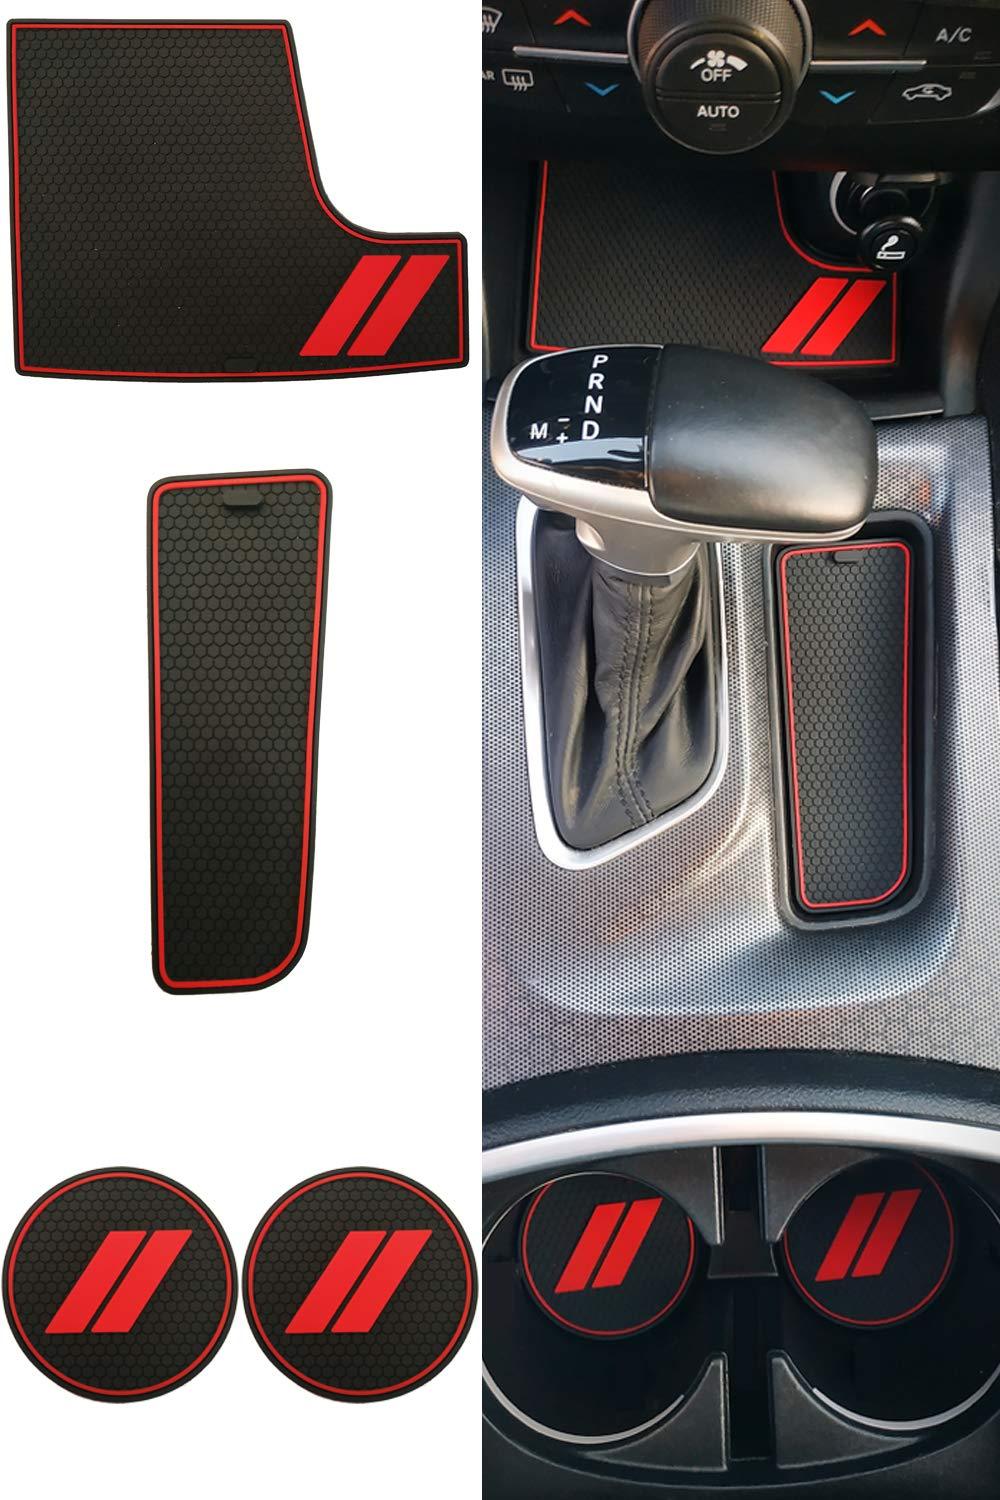  [AUSTRALIA] - GRIDREADY Custom Fit for 2015-2020 Dodge Charger Cup Holder Insert & Center Console Shifter Liner Trim Mats | Custom Fit Non Slip Storage Bin Mat Set | Interior Accessories (4 pcs) Cup Holder & Center Console